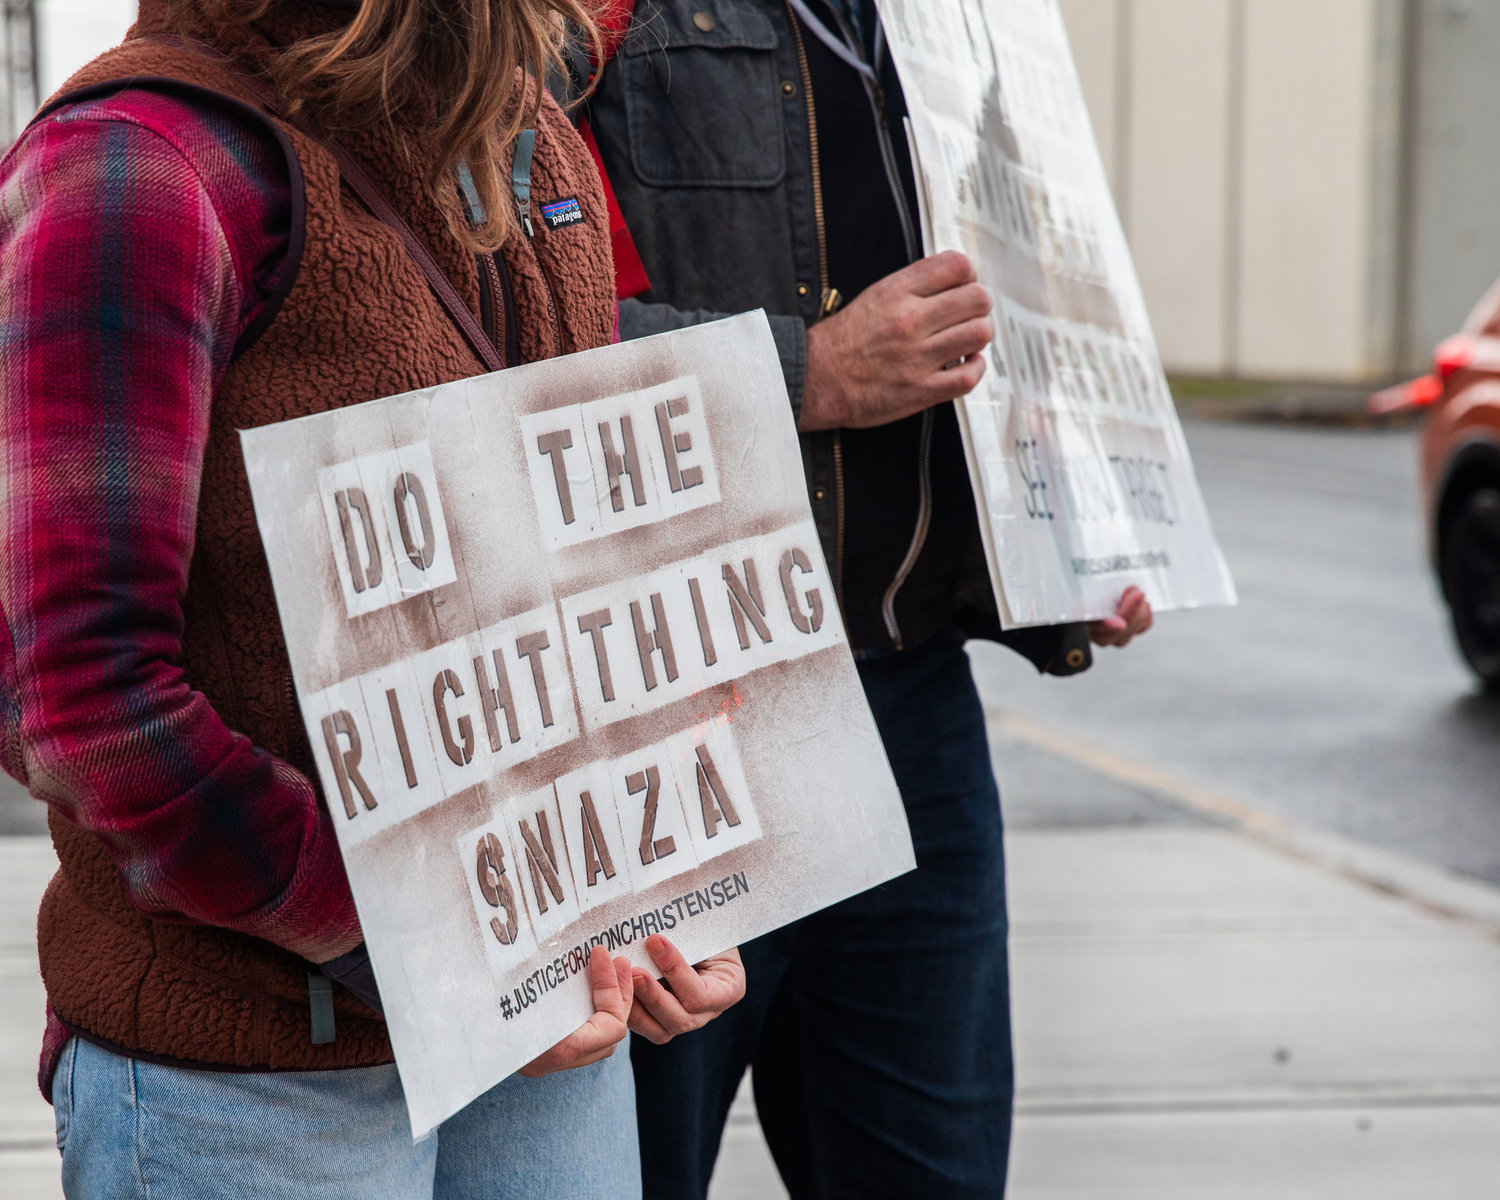 Demonstrators hold signs while demanding justice for Aron Christensen and his dog Buzz in Chehalis on Saturday.